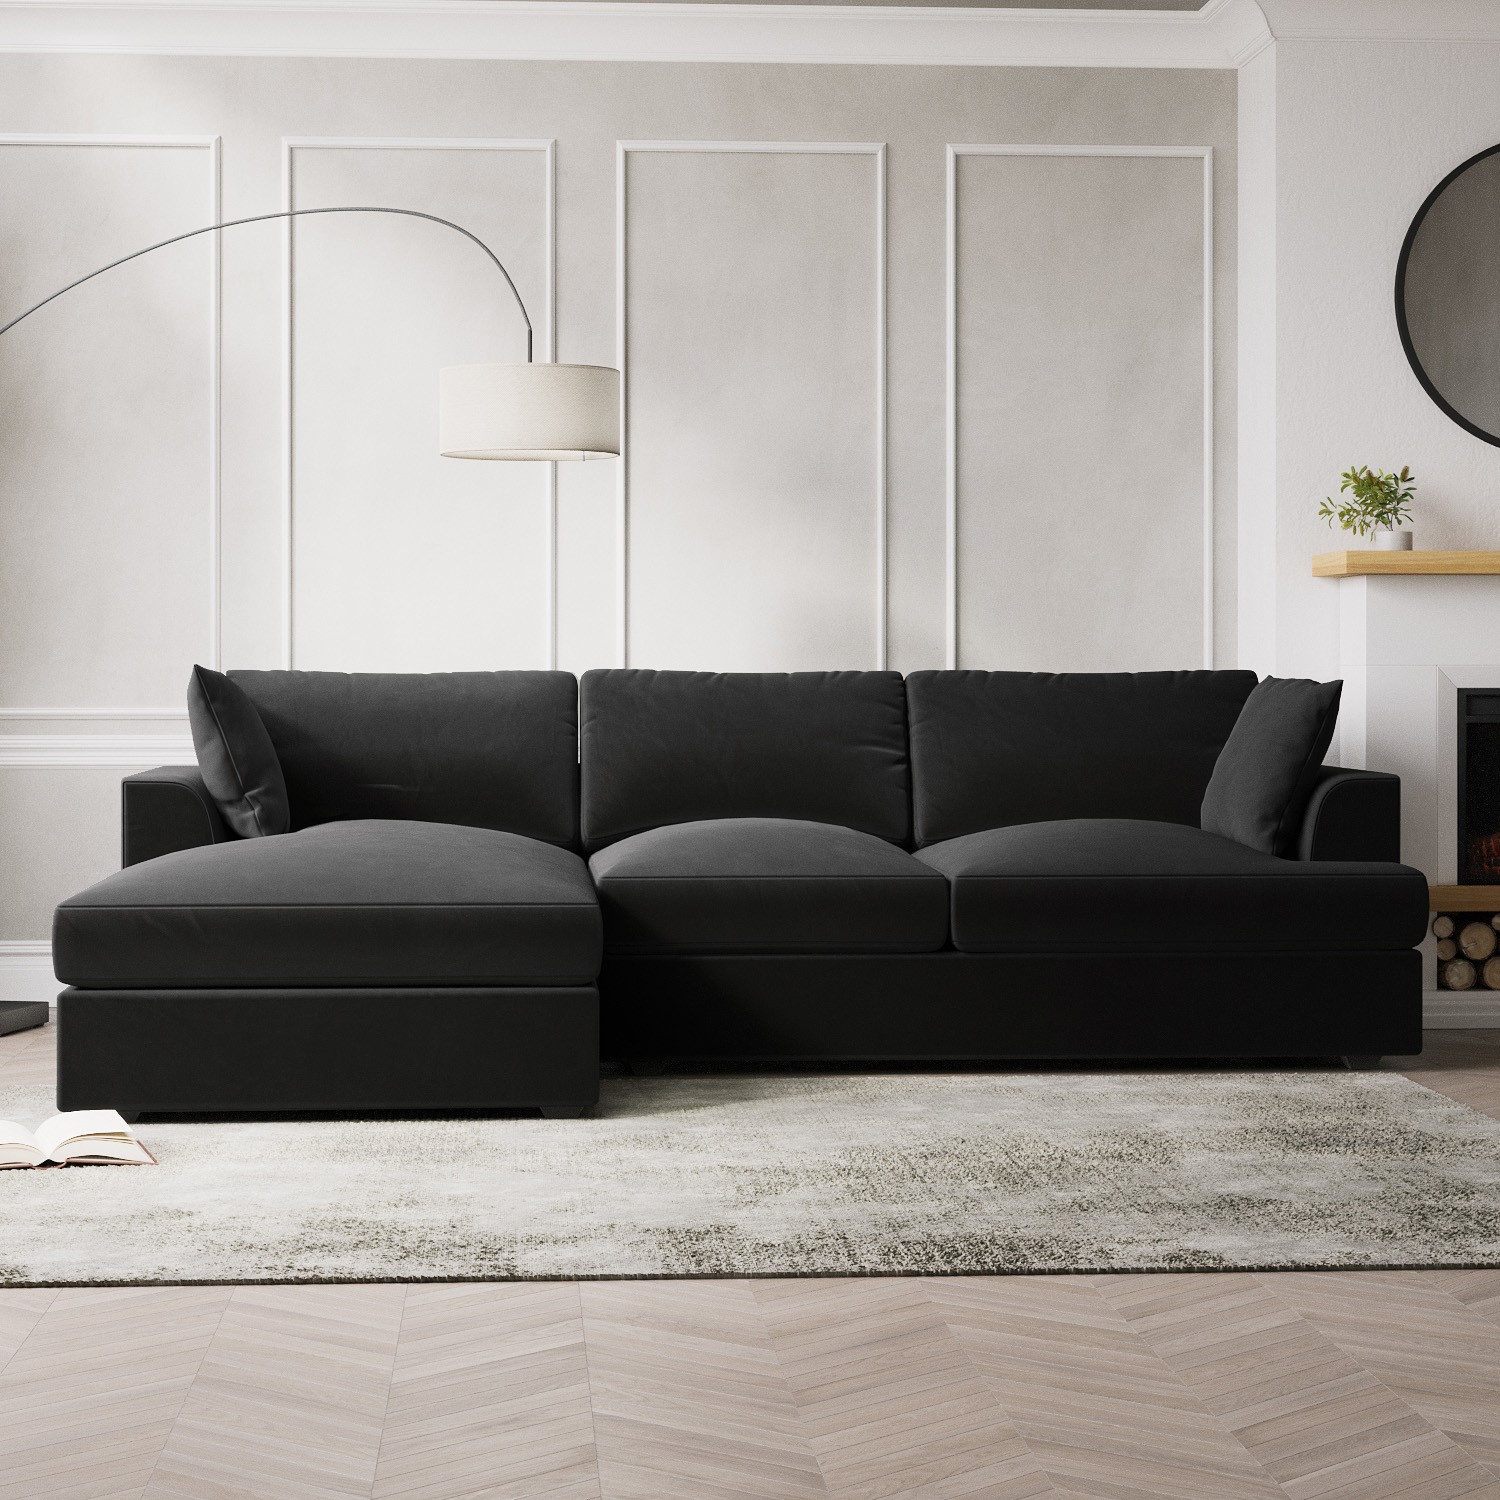 Read more about Dark grey velvet left hand l shaped sofa seats 4 august